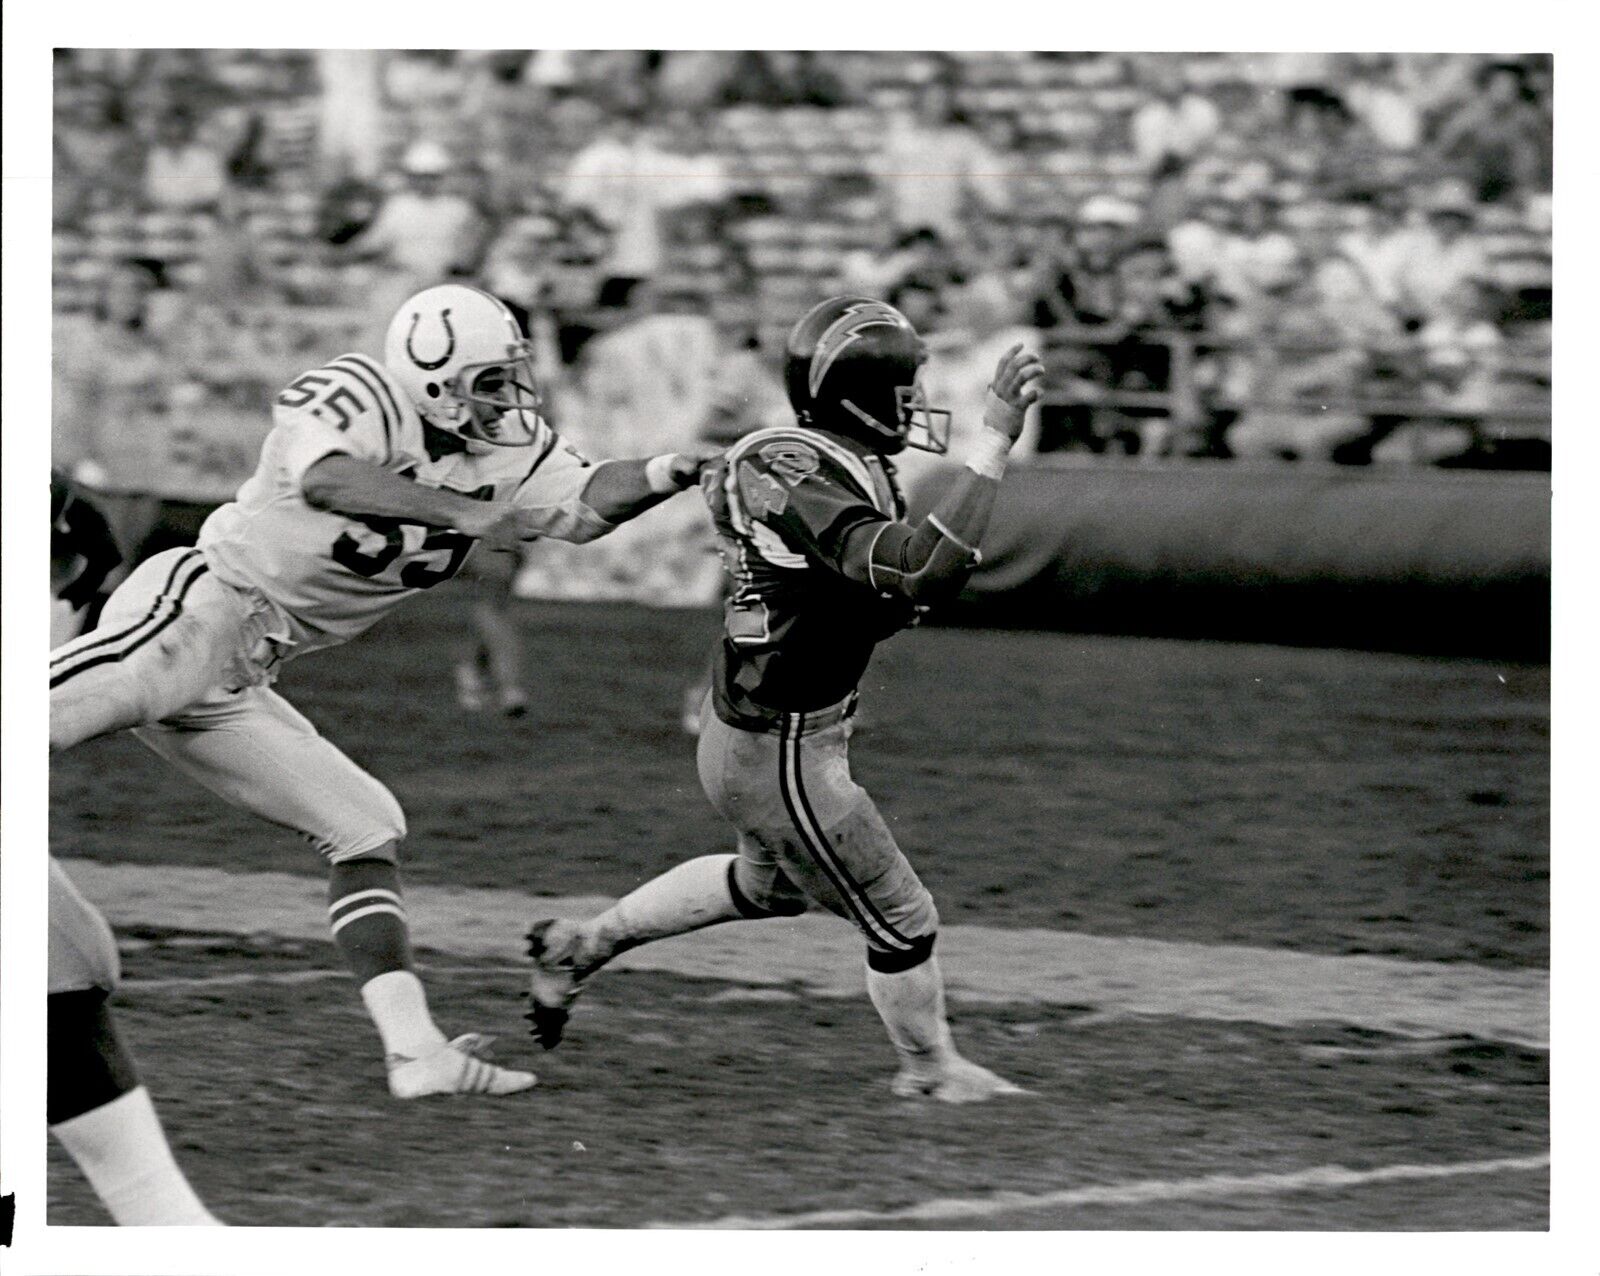 LD330 Orig Darryl Norenberg Photo MIKE FULLER 1975-80 SAN DIEGO CHARGERS SAFETY